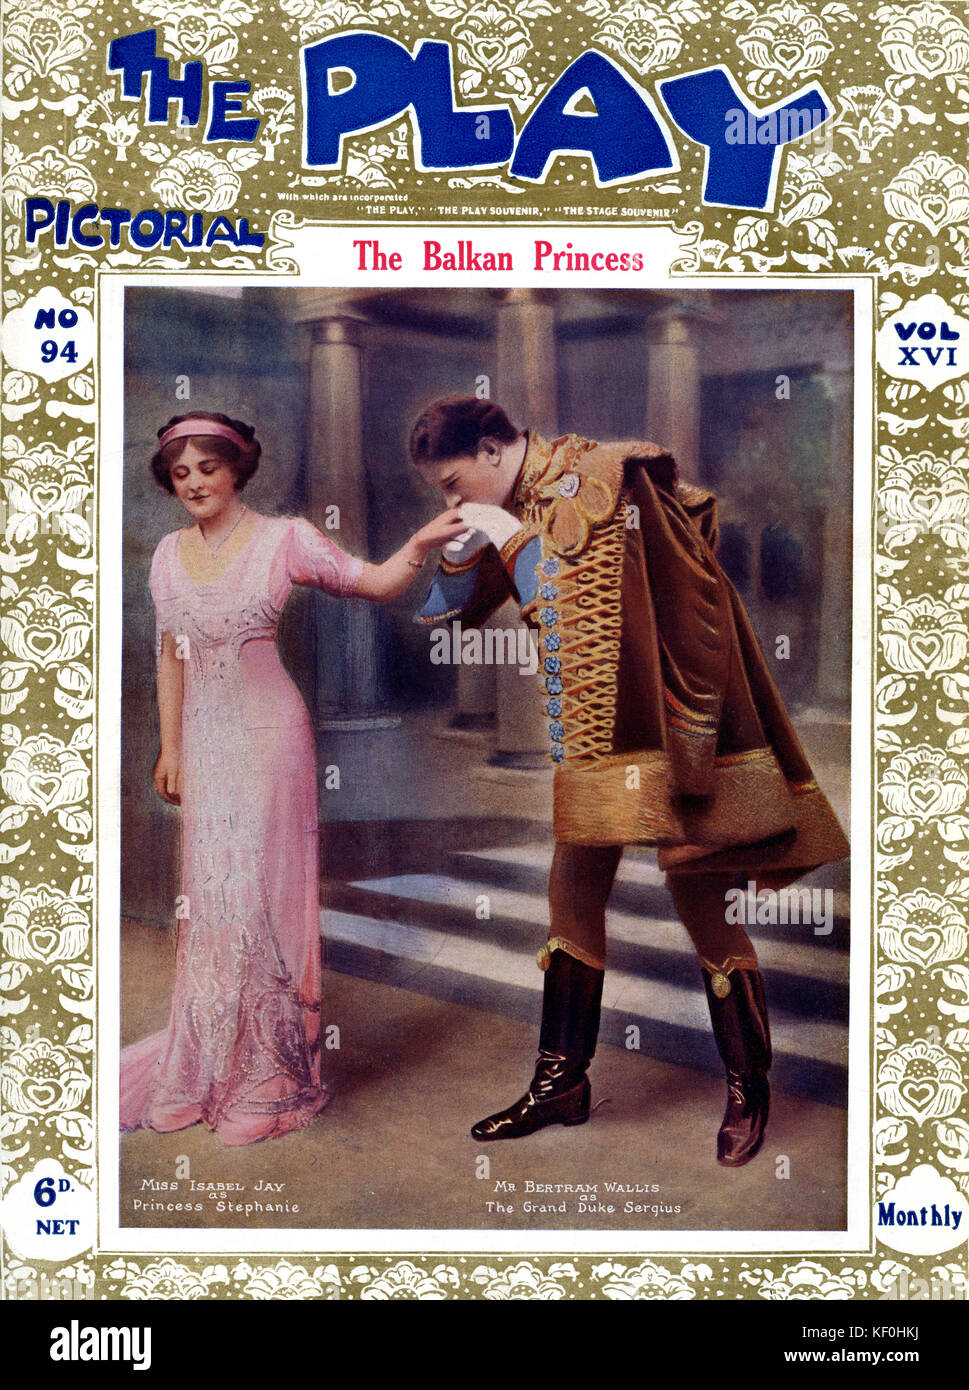 'The Balkan Princess' by Frederick Lonsdale and Frank Curzon, with Isabel Jay as Princess Stephanie (October 17, 1879 – February 26, 1927) and Bertram Wallis as The Grand Duke Serquis (22 February 1874 - 11 April 1952). Cover of Play Pictorial, 1910. Stock Photo